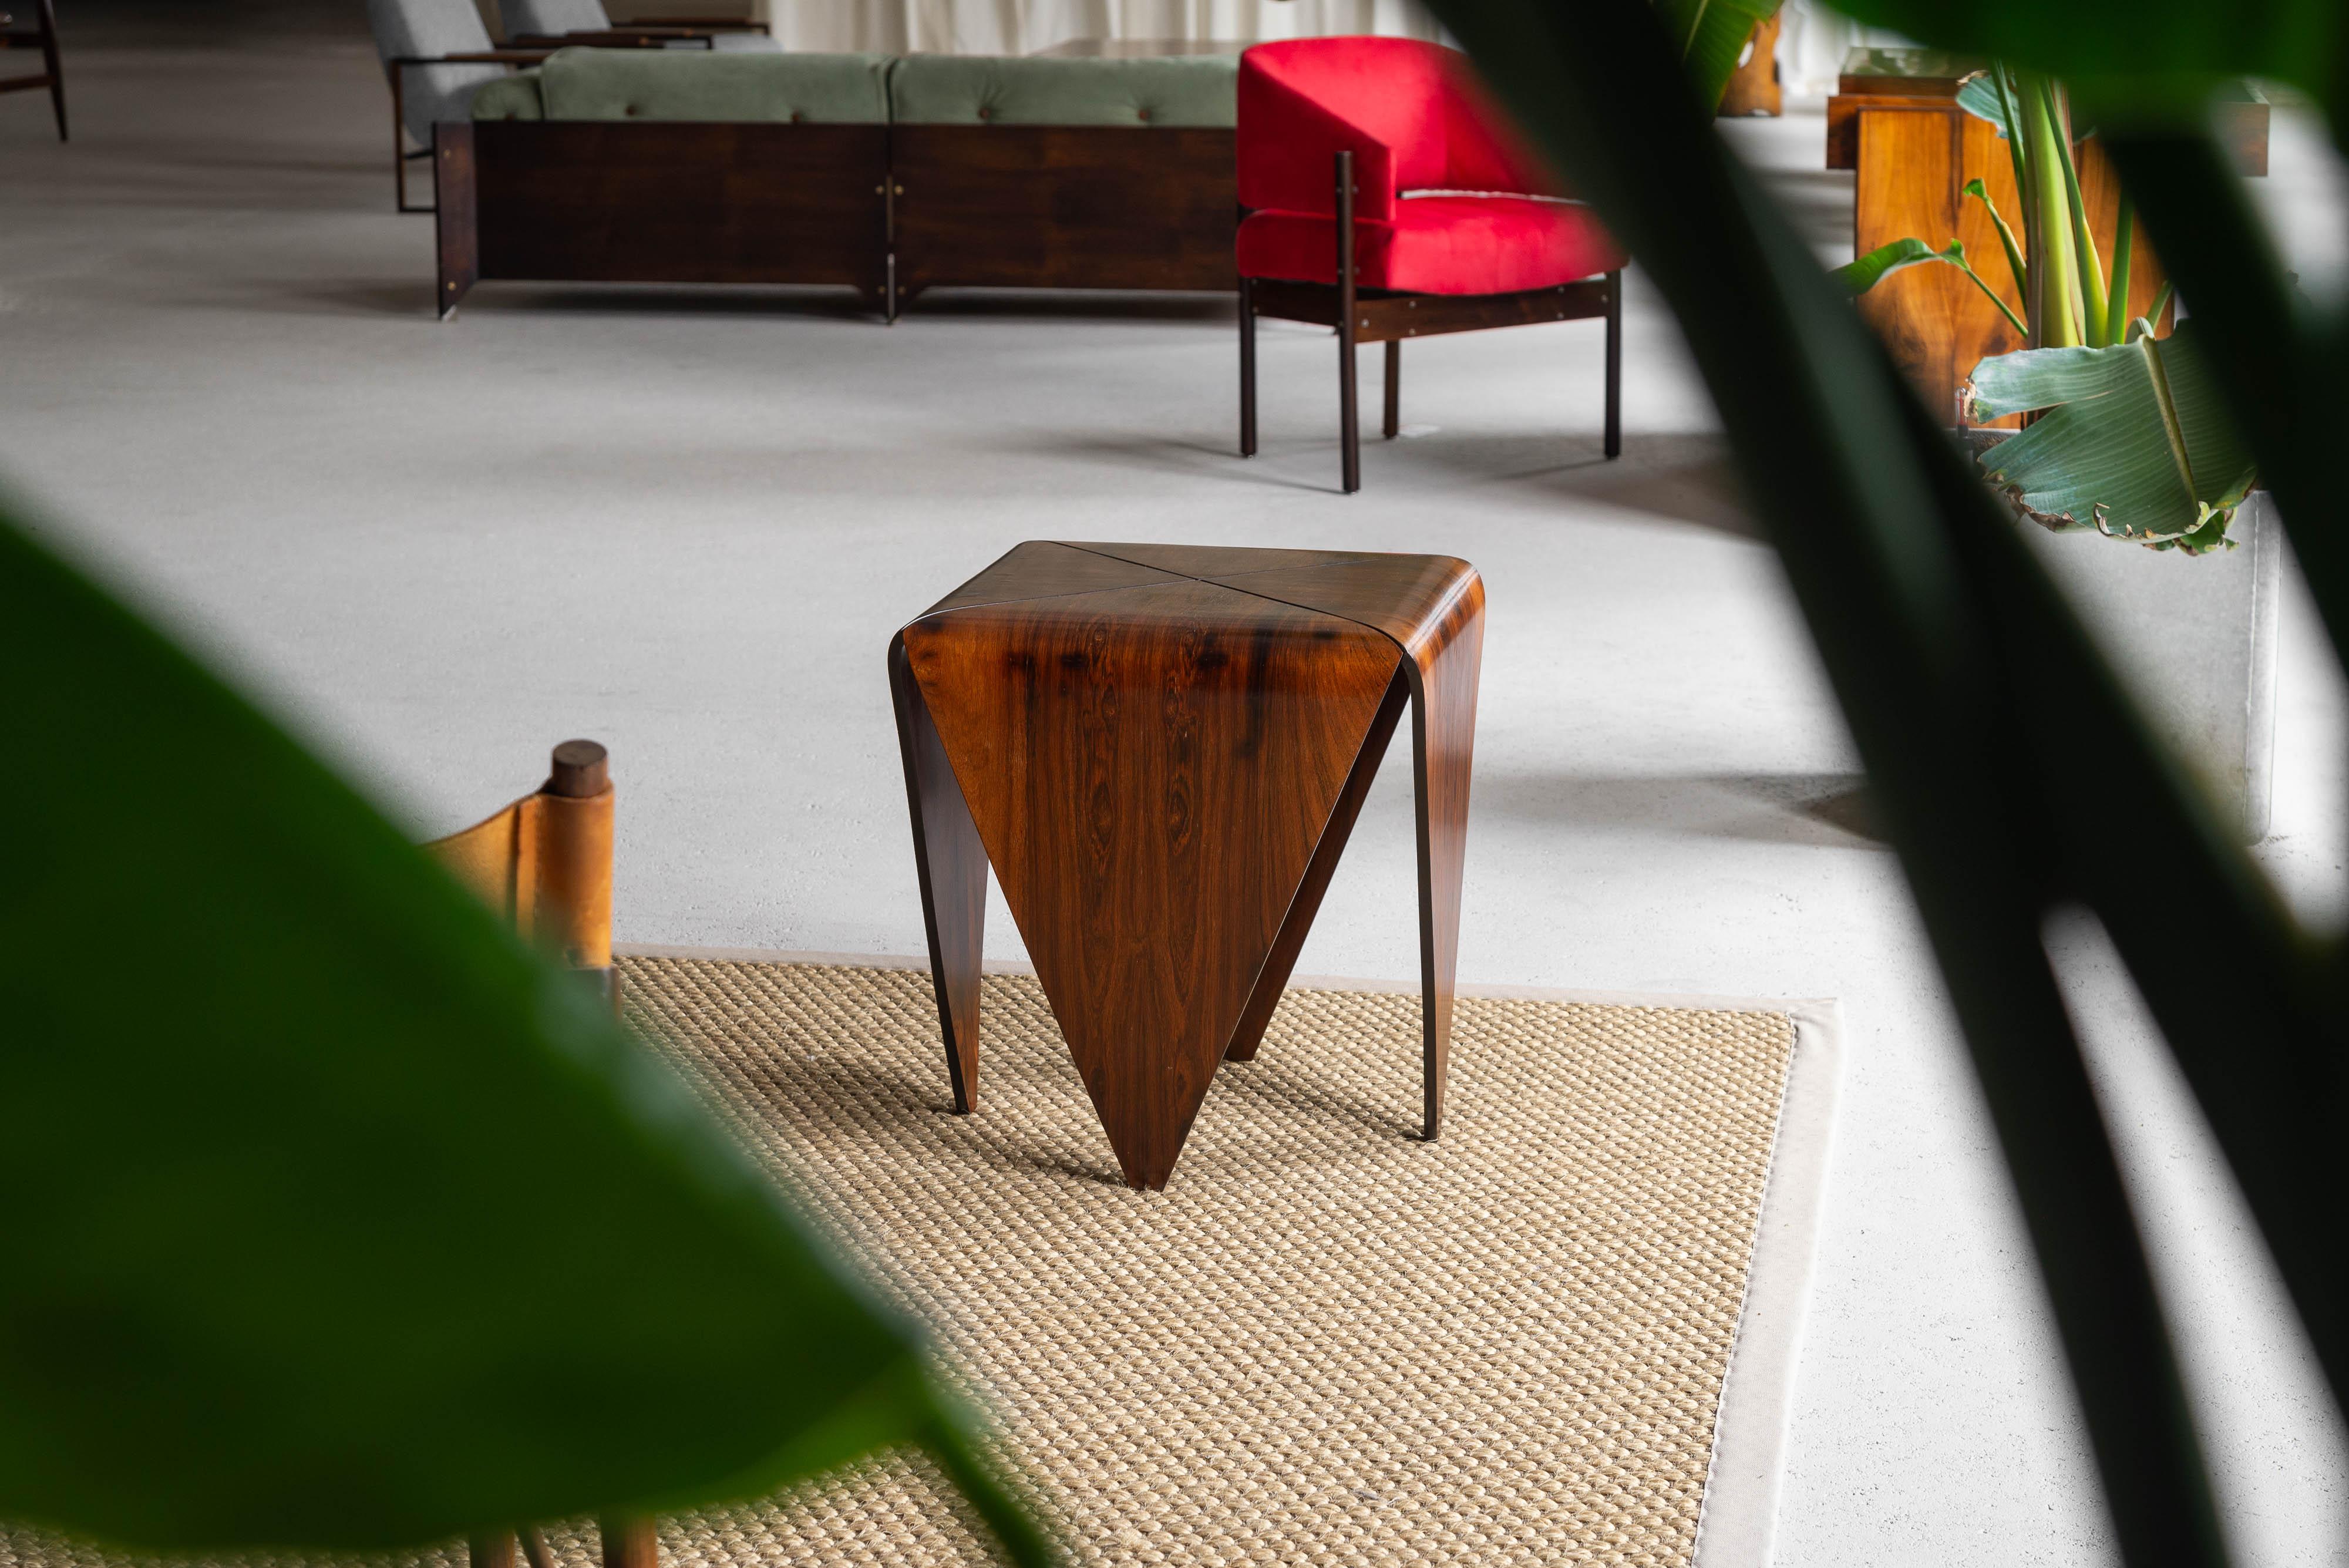 Iconic side table designed by Jorge Zalszupin and manufactured by L'Atelier, Brazil 1960. One of the most iconic designs by Zalszupin, in beautiful grained rosewood. The folded paper structures of origami constitute the inspiration for the Pétalas